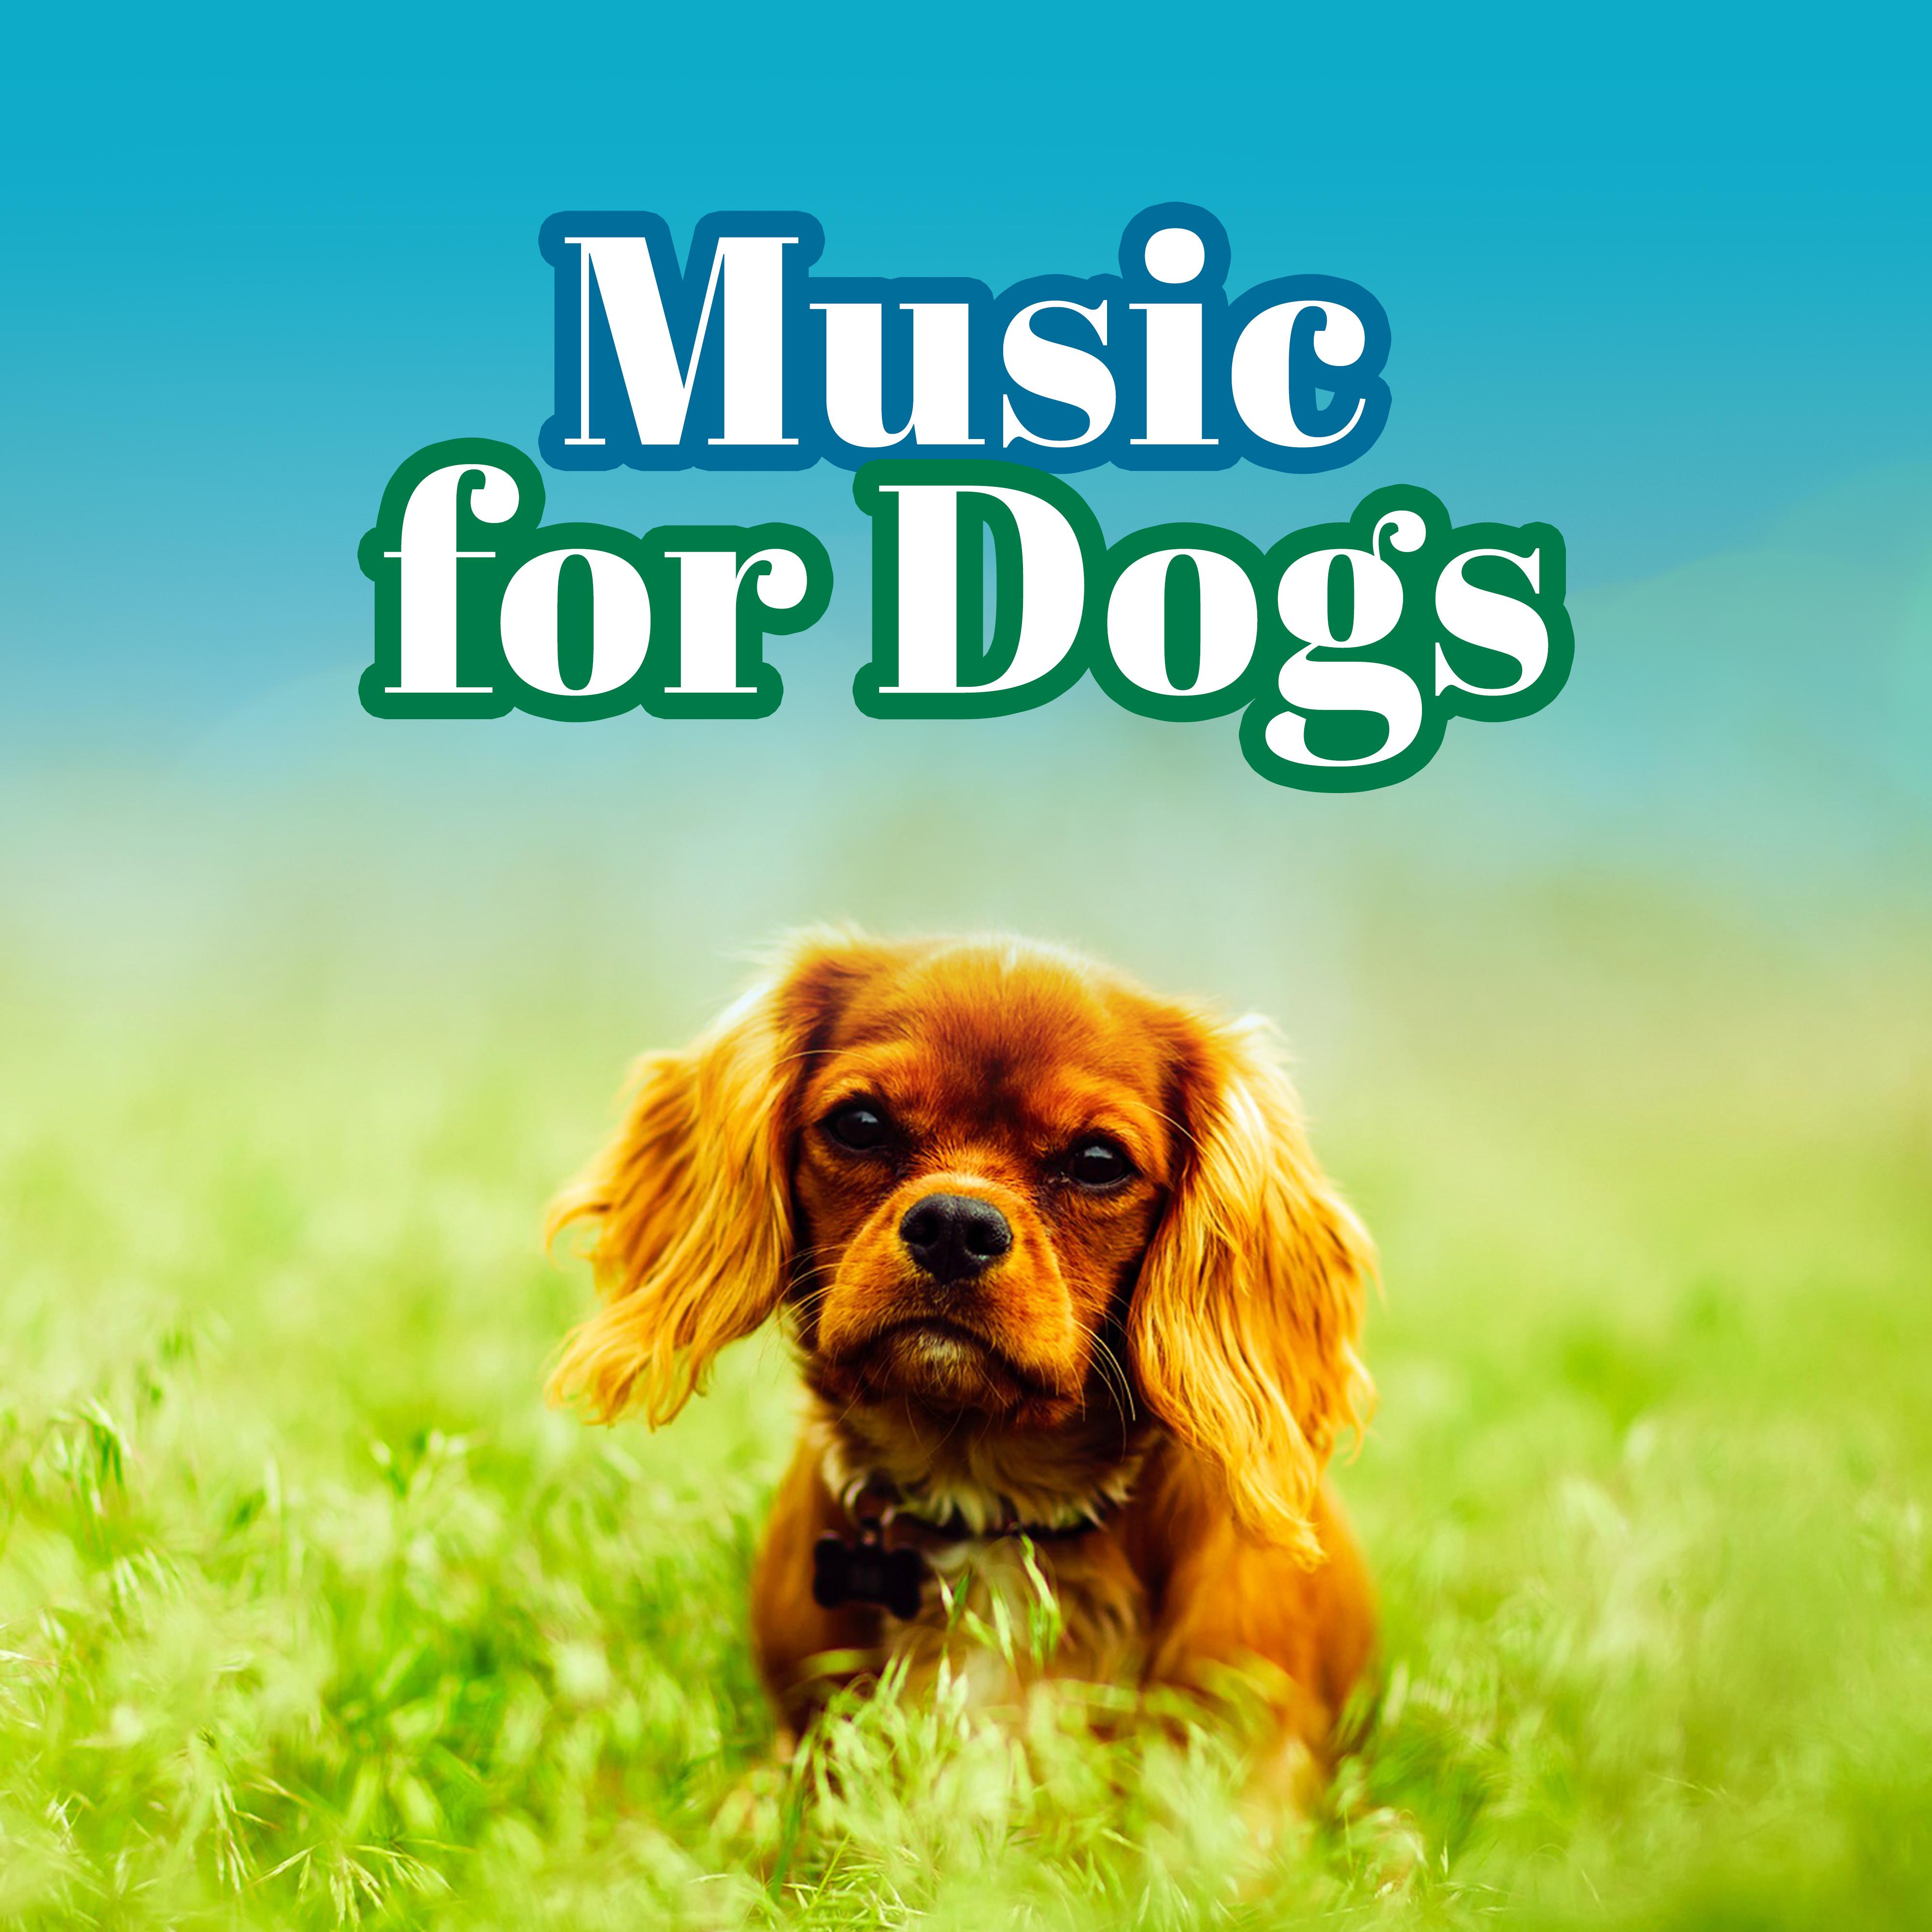 Music for Dogs  15 Best Relaxing Songs for Pets, Piano Dog Music, Pet Therapy, Sleeping Music for Pets